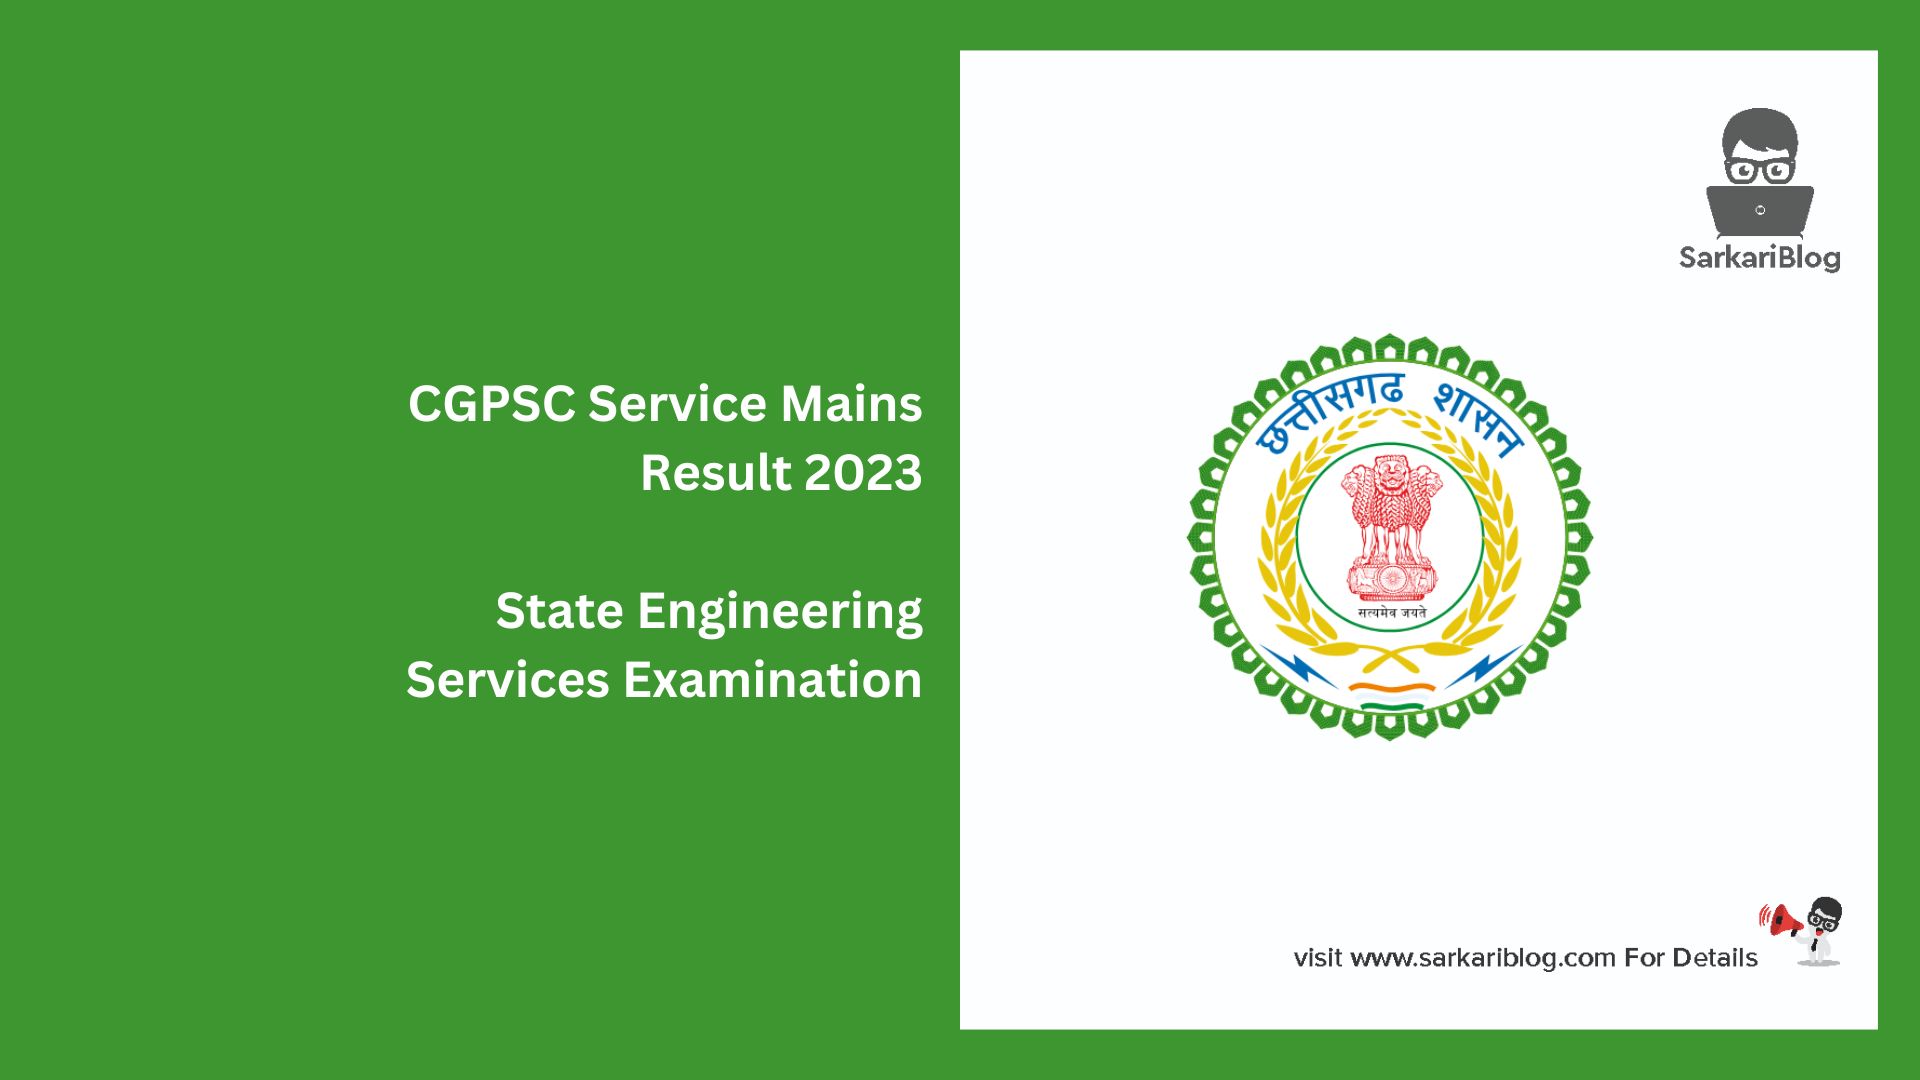 CGPSC Service Mains Result 2023